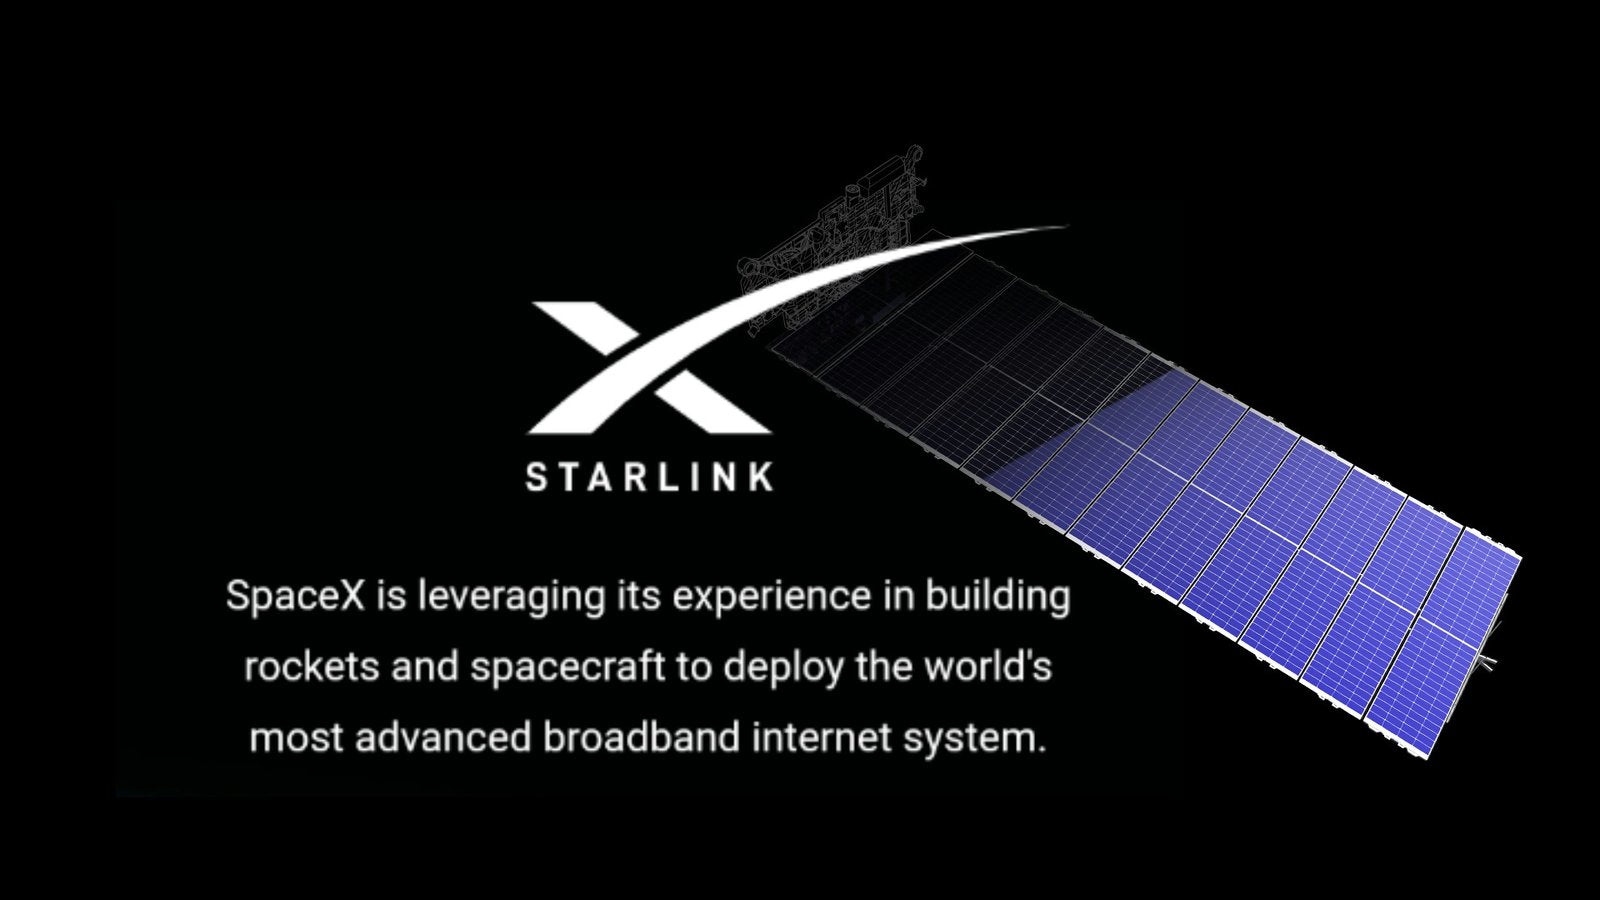 SpaceX official says Starlink satellite internet will be offered in the Philippines this year